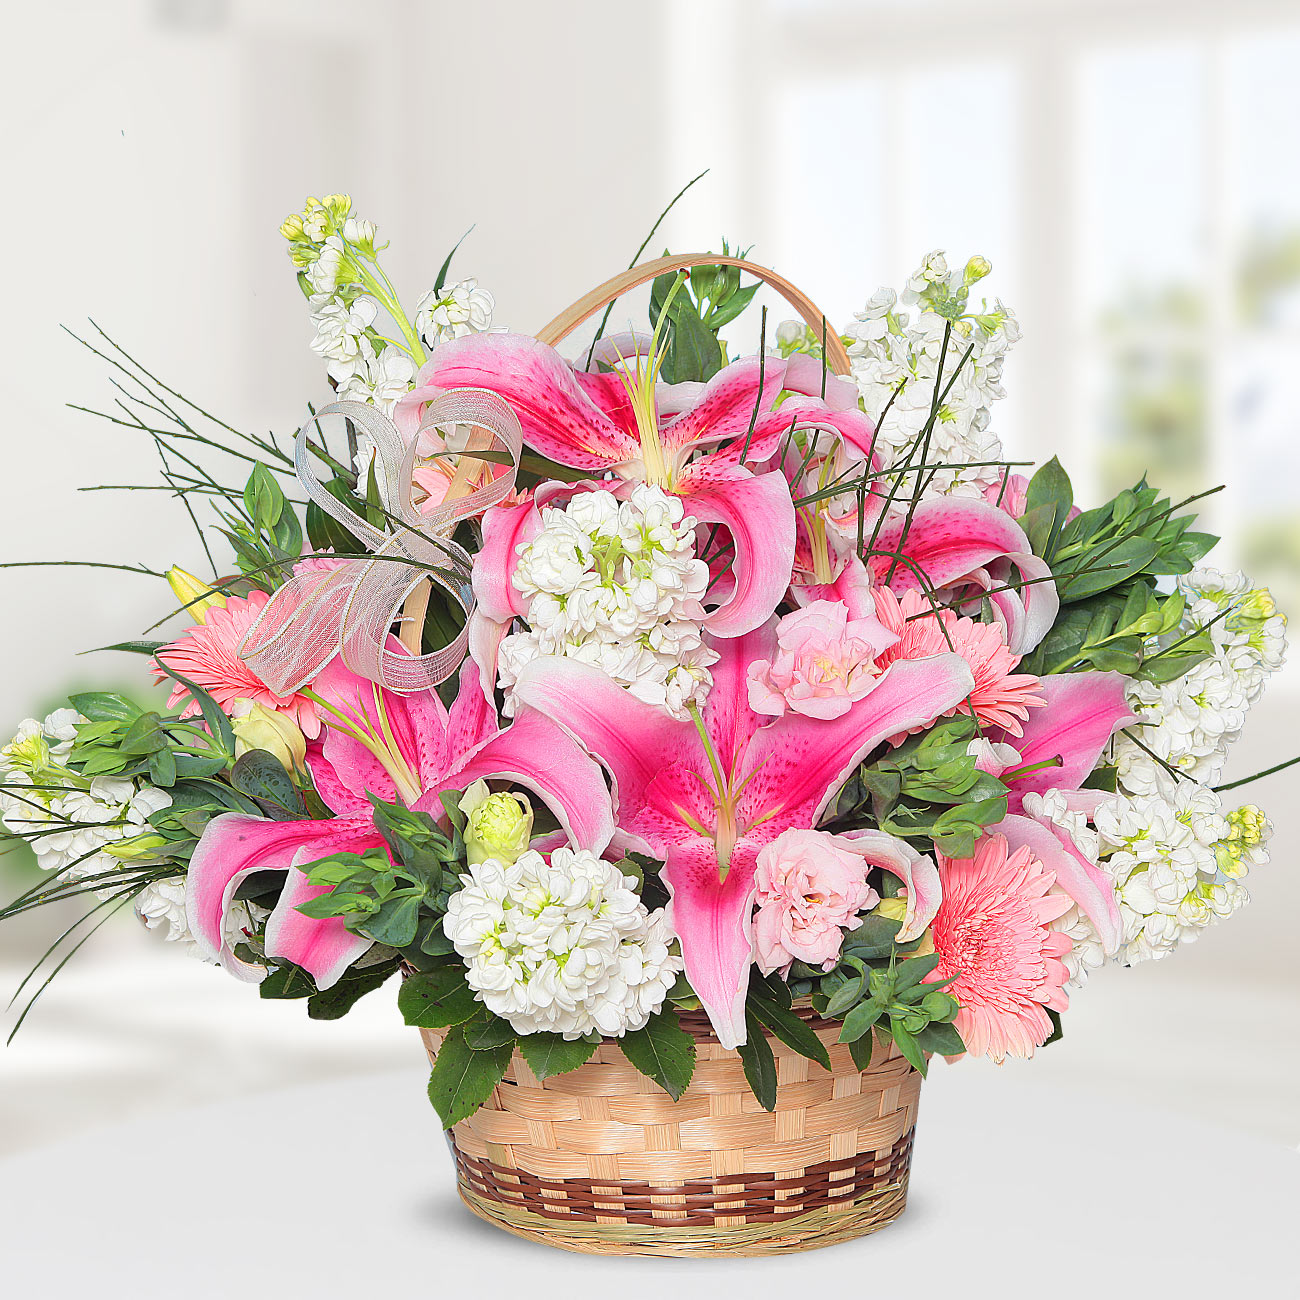 Send flowers Turkey, Pink Lilies Gerberas and Gillyflowers from 22USD